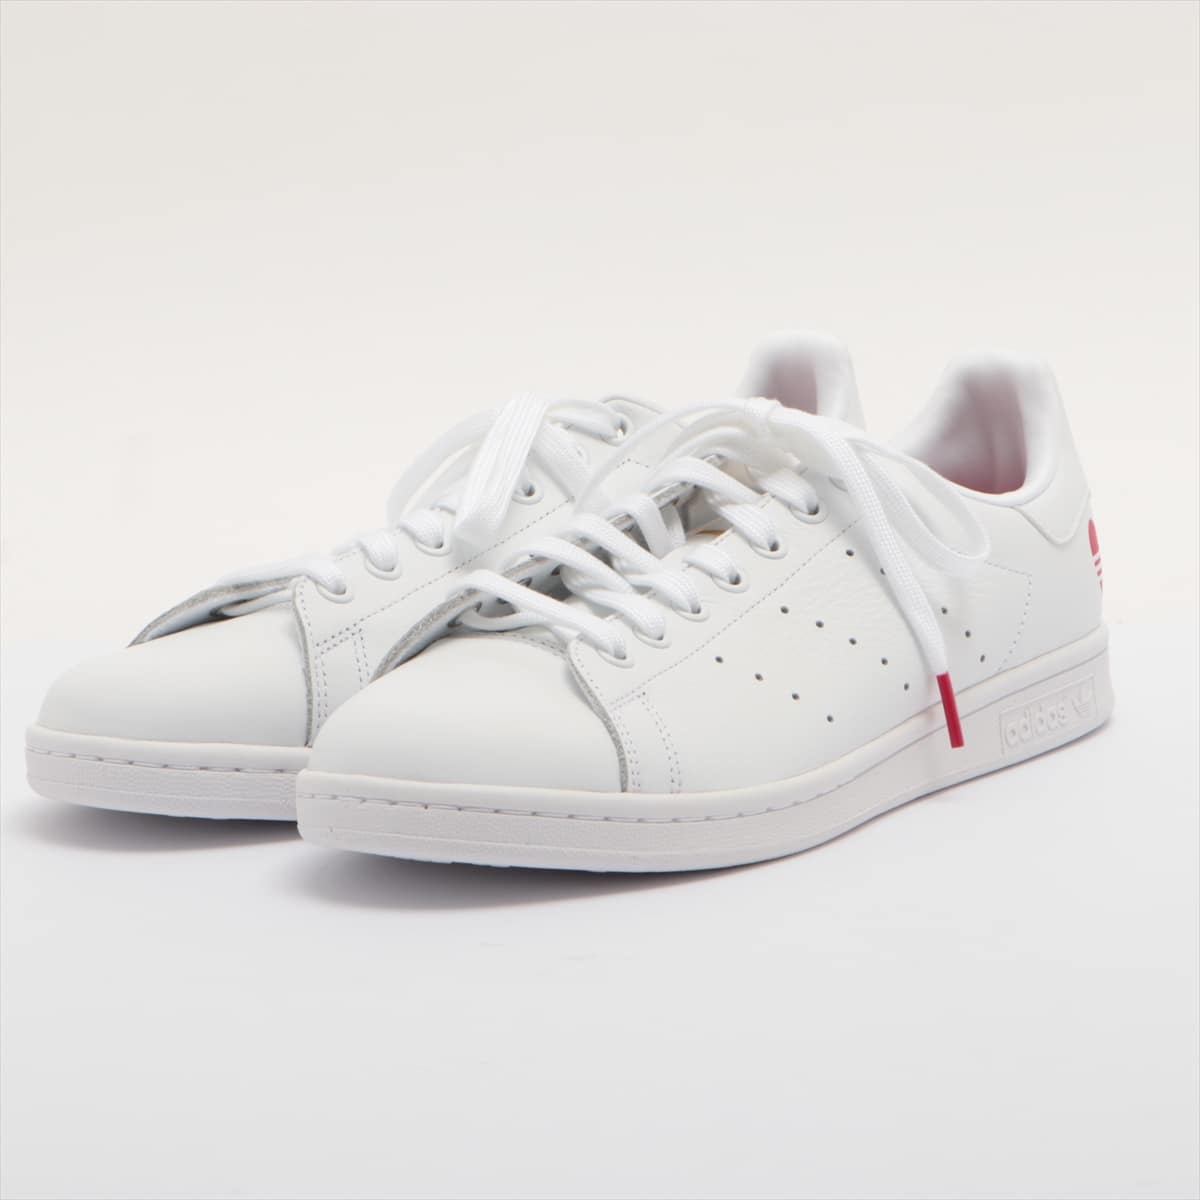 Adidas 20 years Leather Sneakers JPN28 Men's White Stan Smith FW6390 Valentine's Day